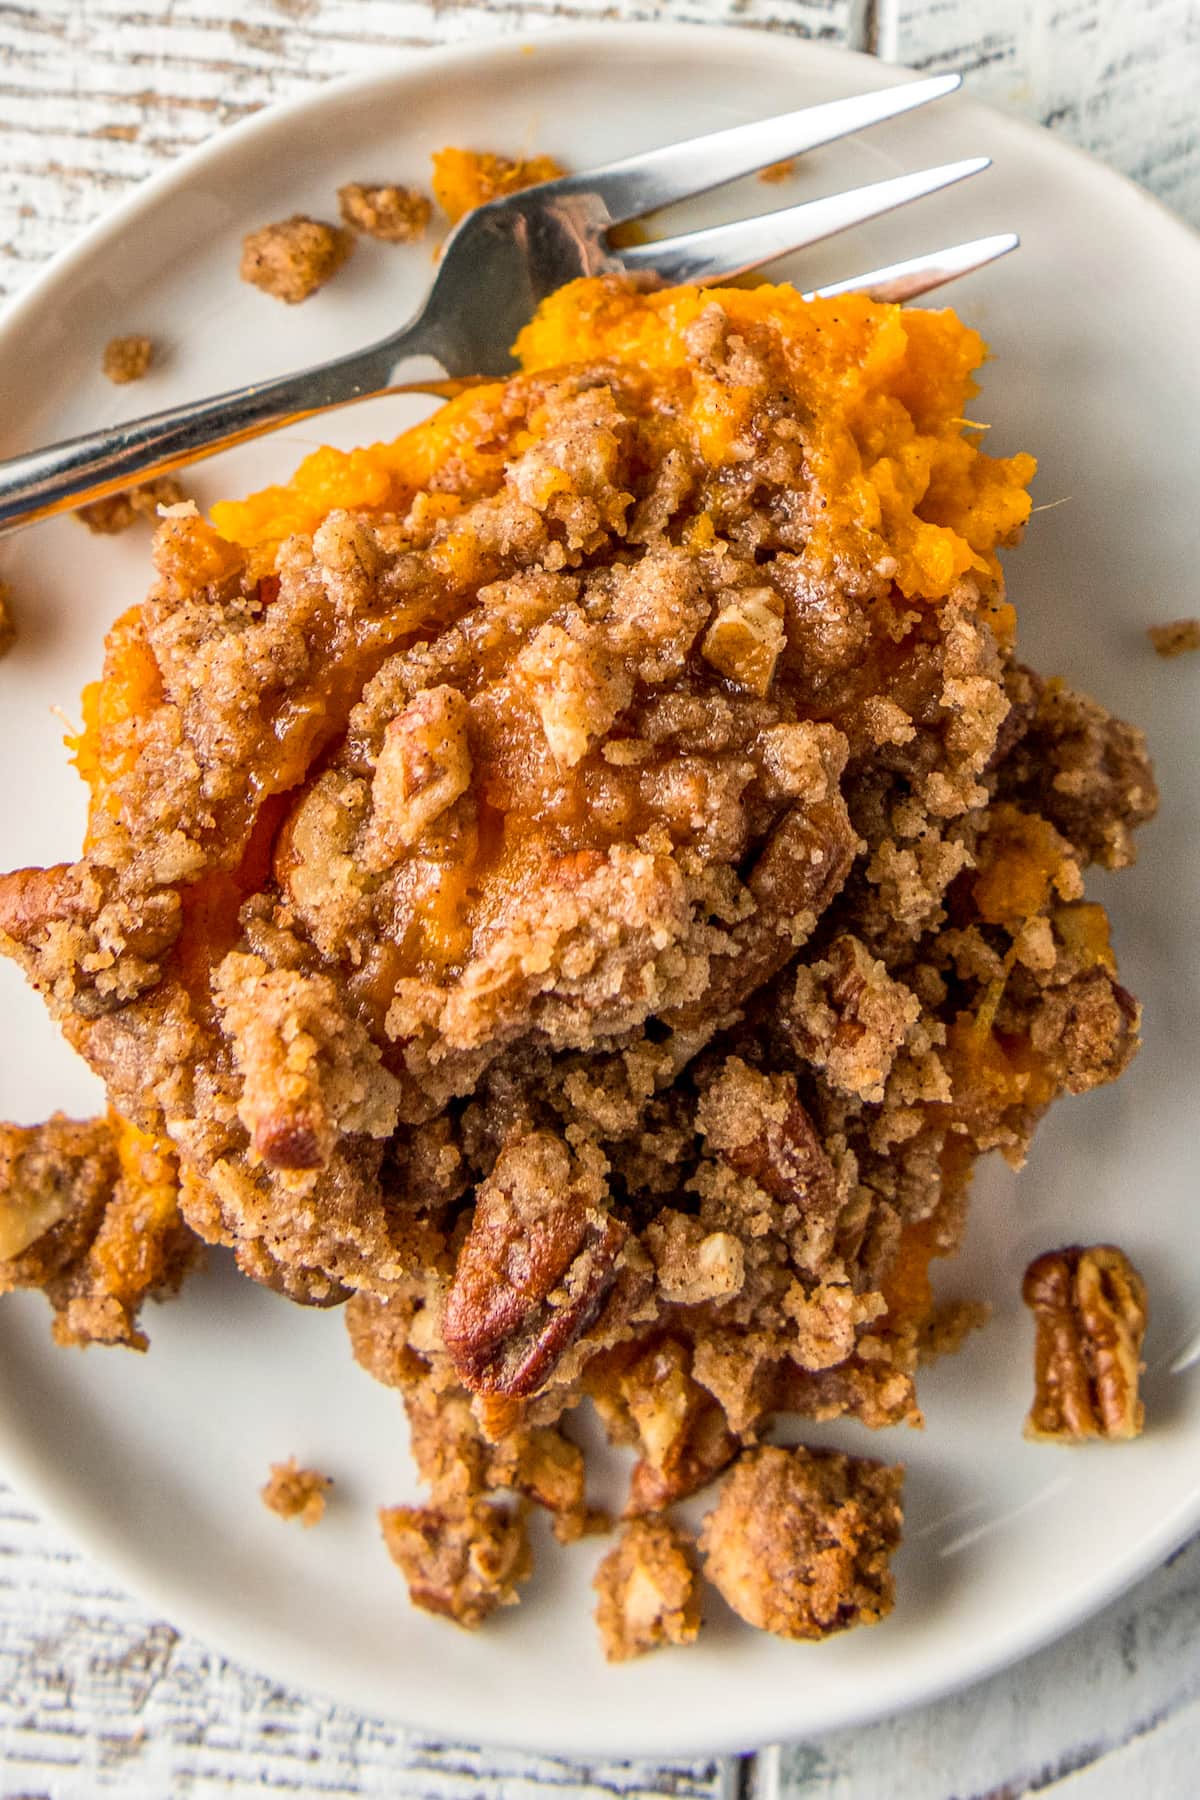 a scoop of sweet potato soufflé with brown sugar and pecan topping